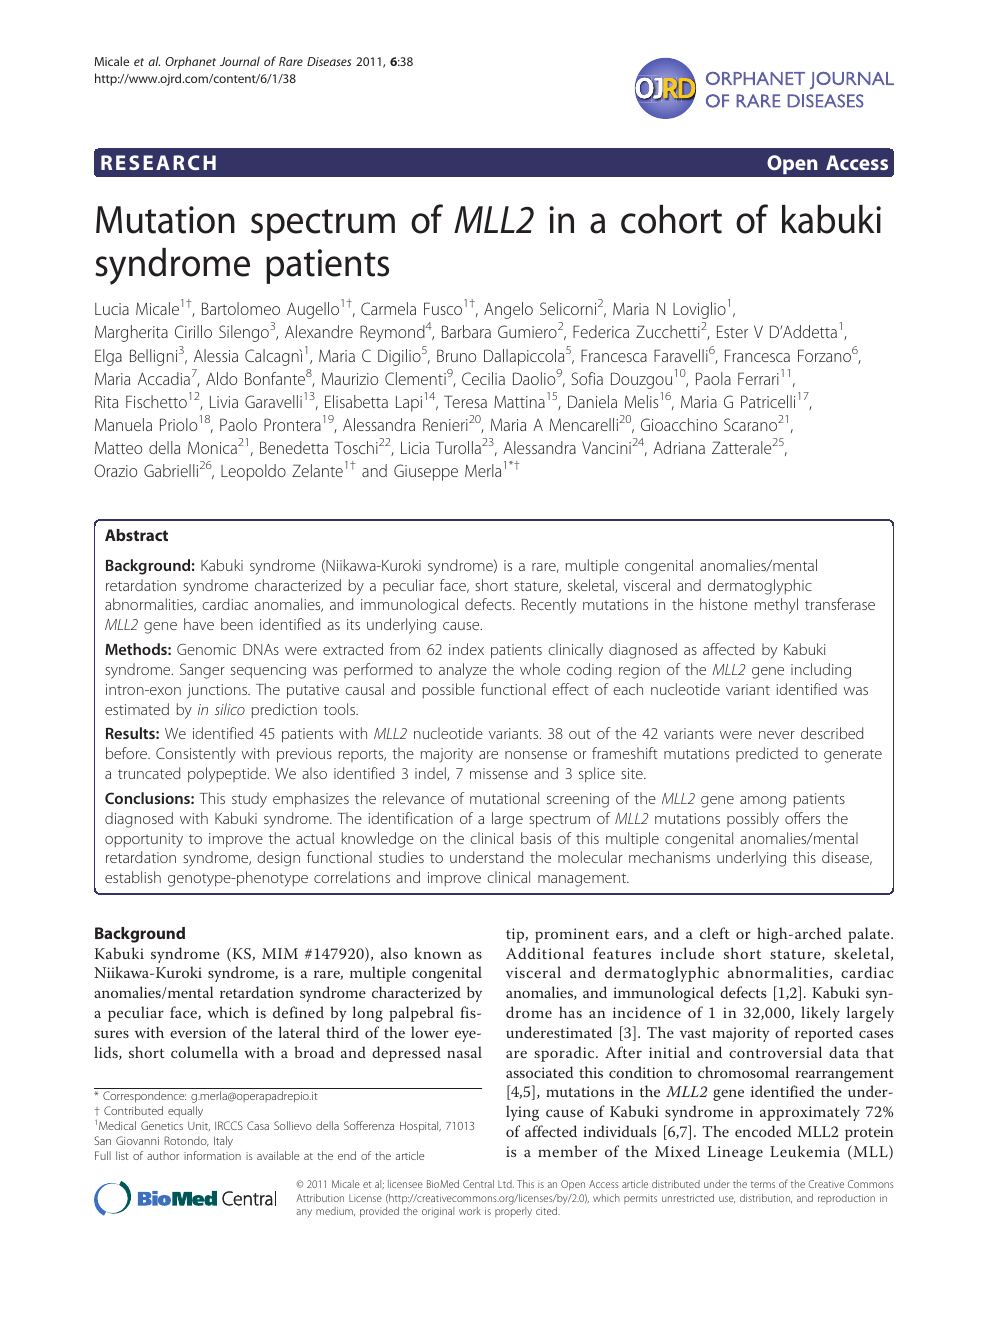 Clinical heterogeneity of Kabuki syndrome in a cohort of Italian patients  and review of the literature